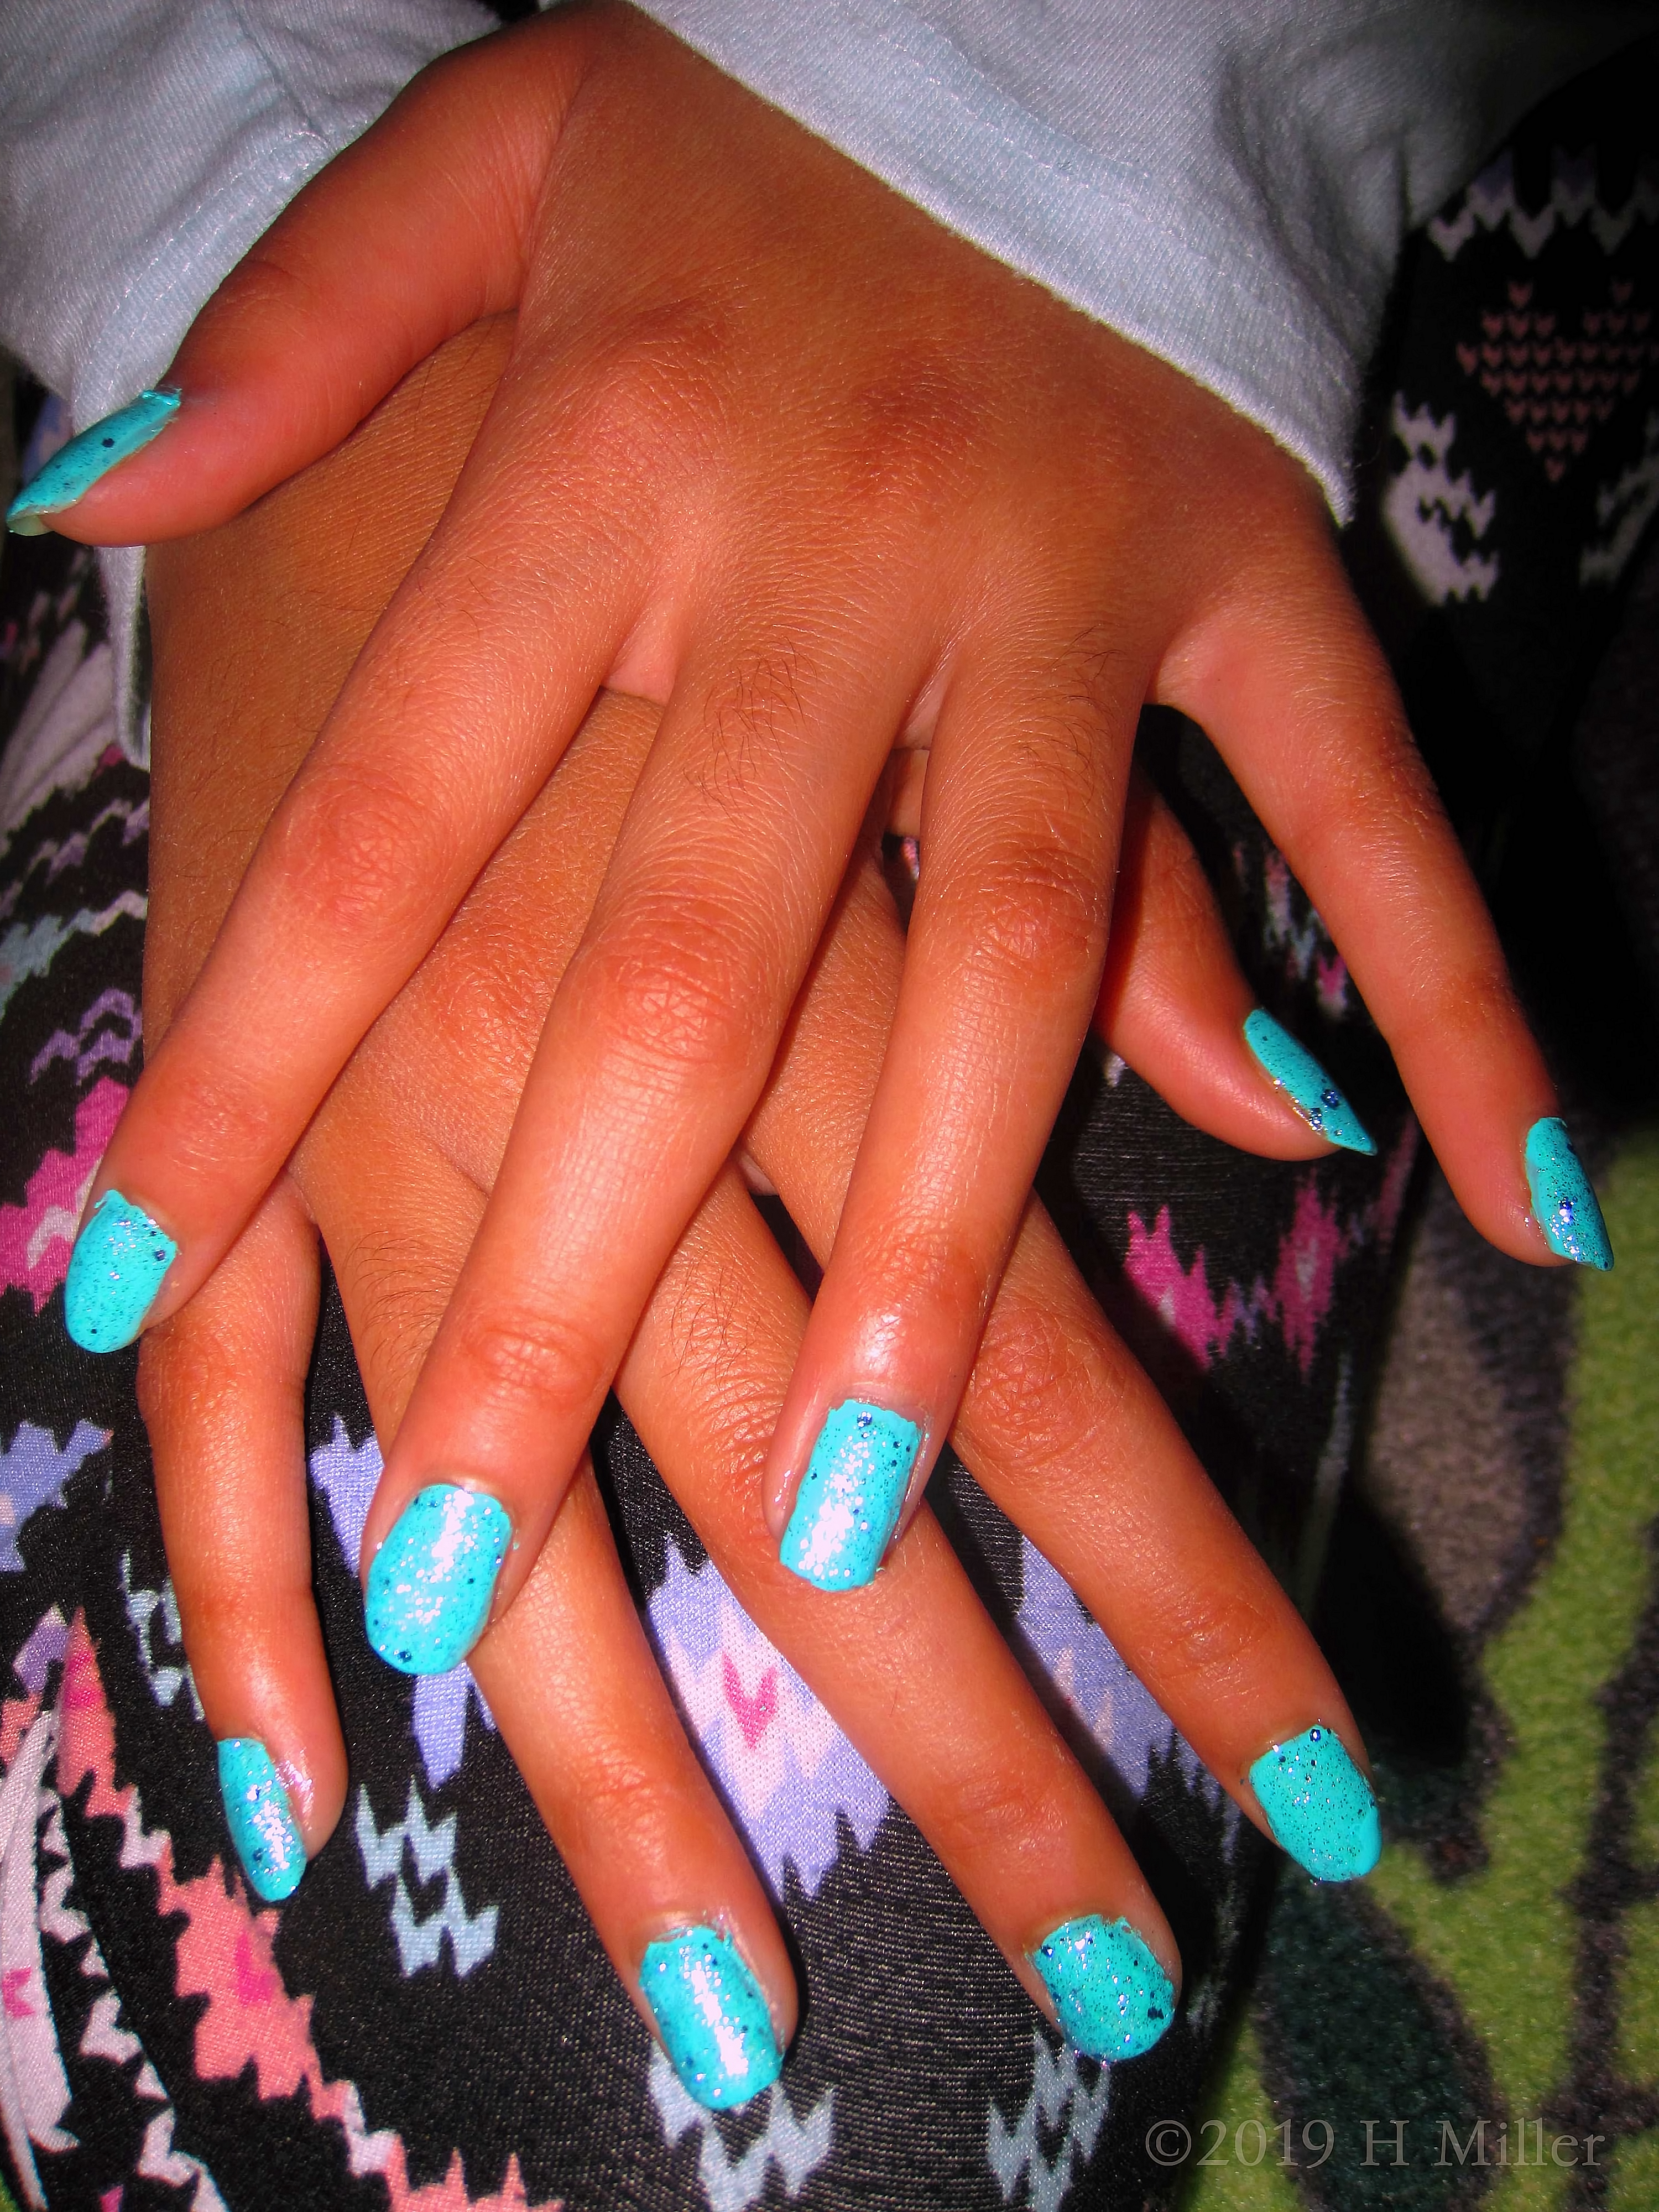 Magnificent Turquoise Blue Kids Manicure With Glitter! 